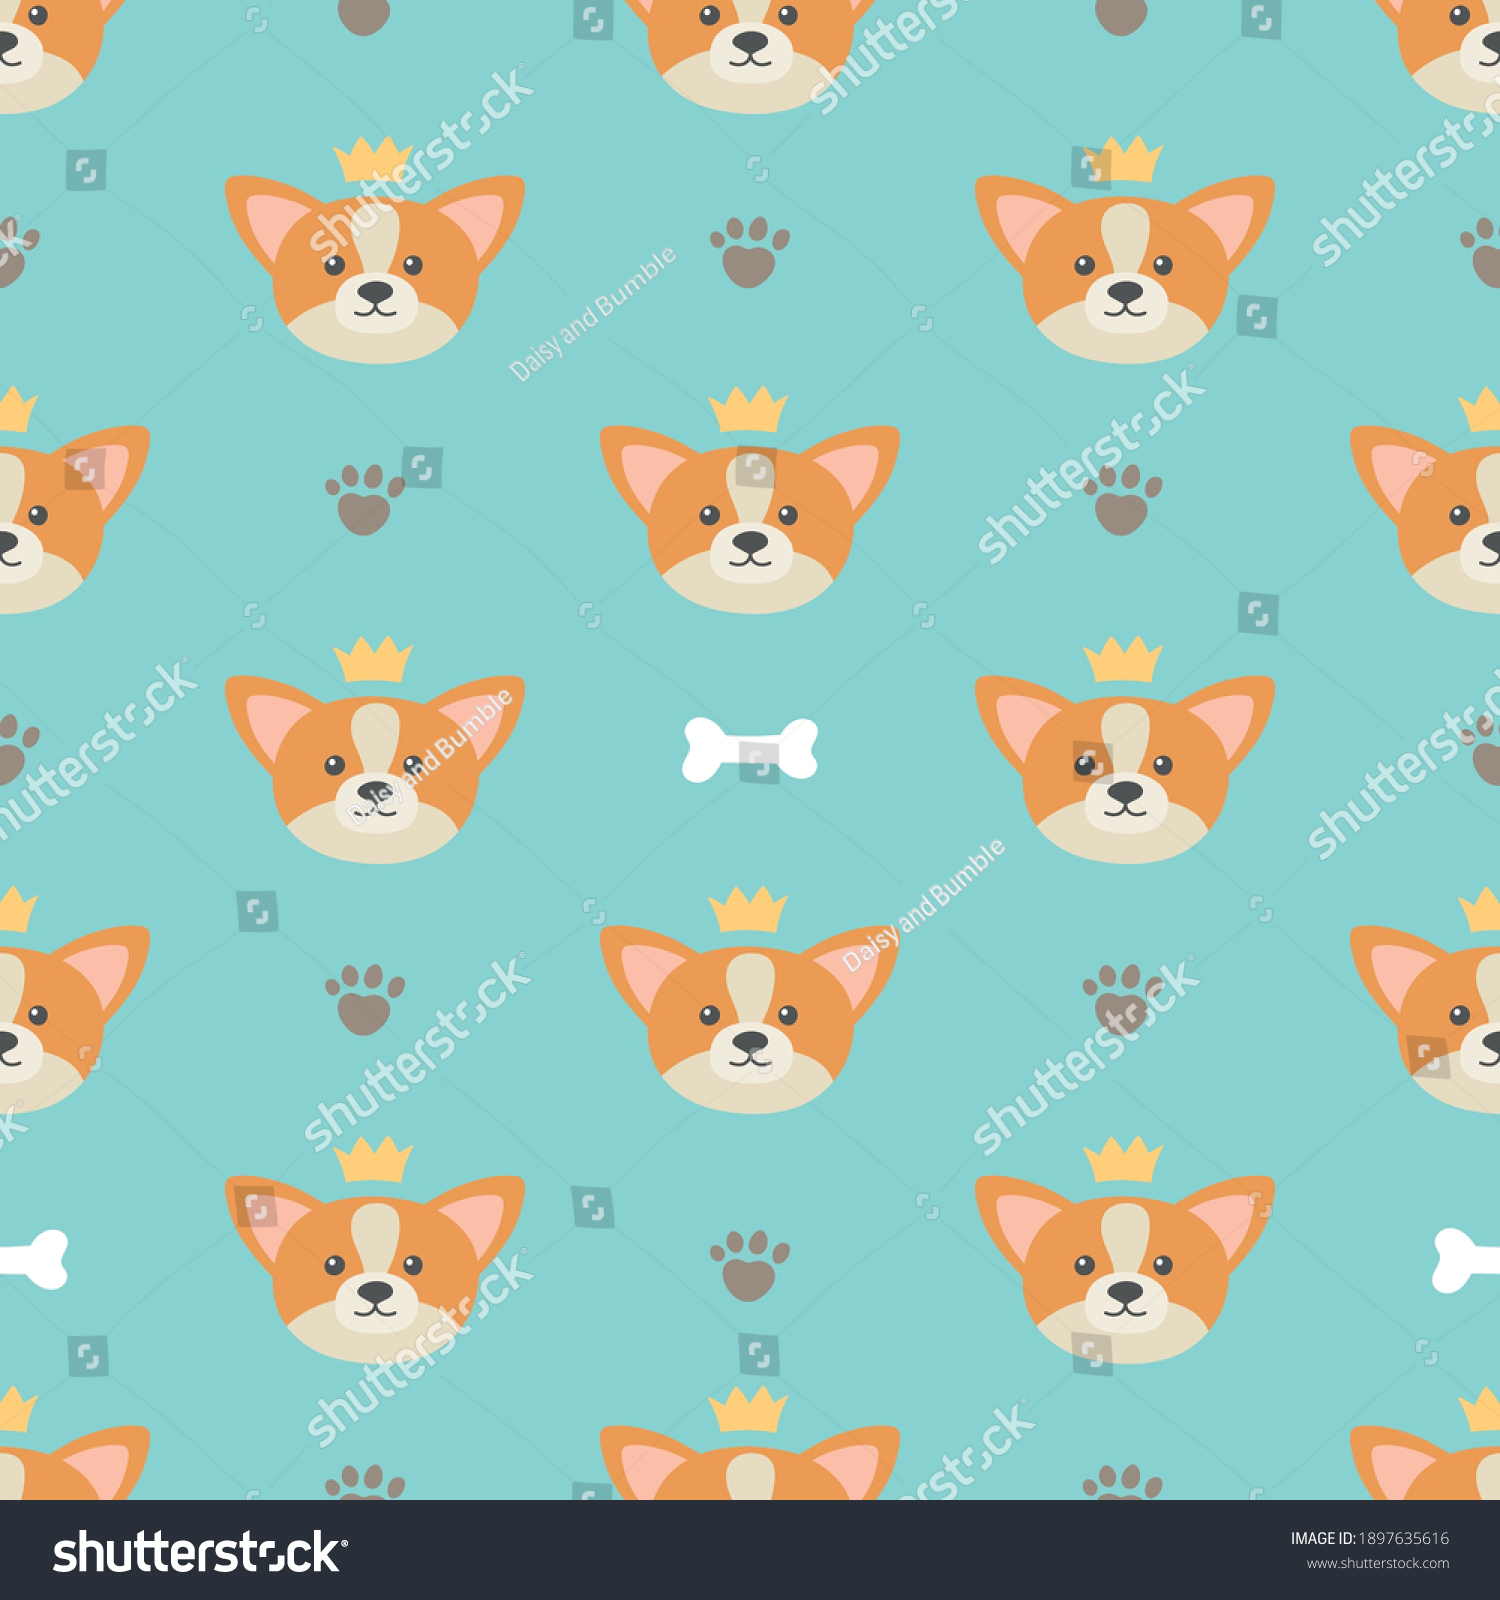 SVG of Corgi dog pattern on a blue background with paw prints, bones. For packaging, wrapping paper, textile  svg